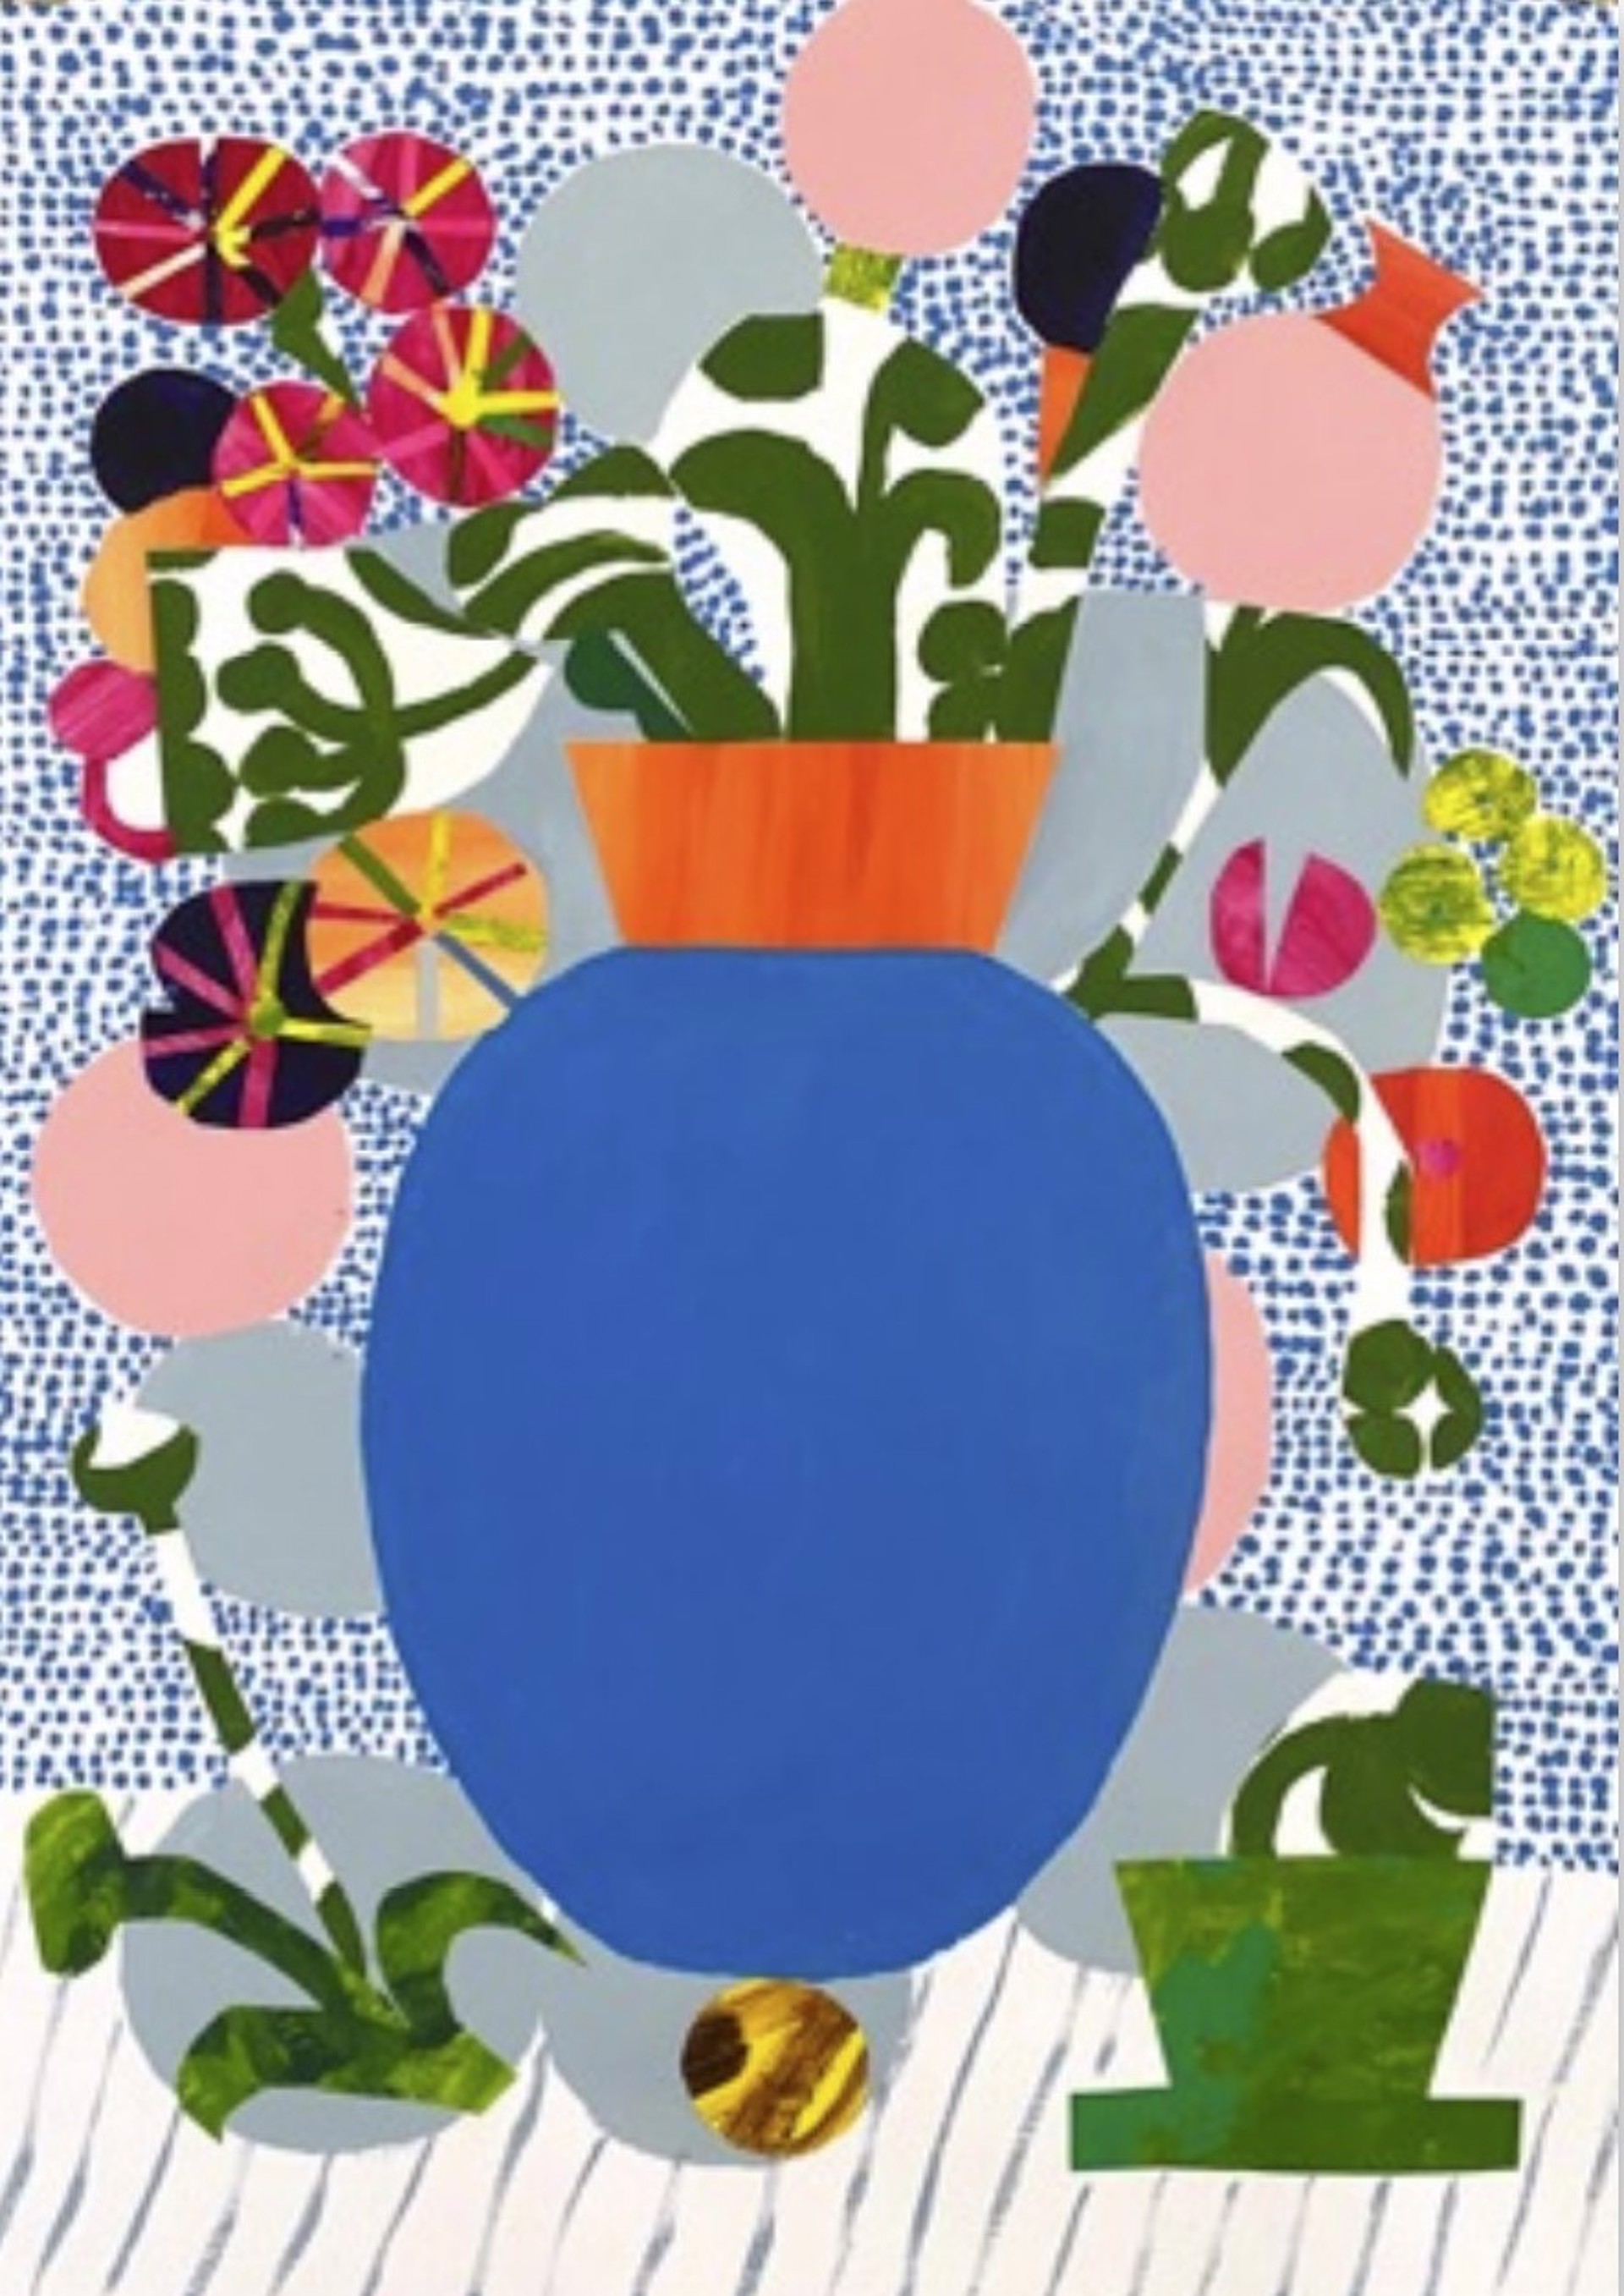 Vase and Flowers I by Maria Lundström